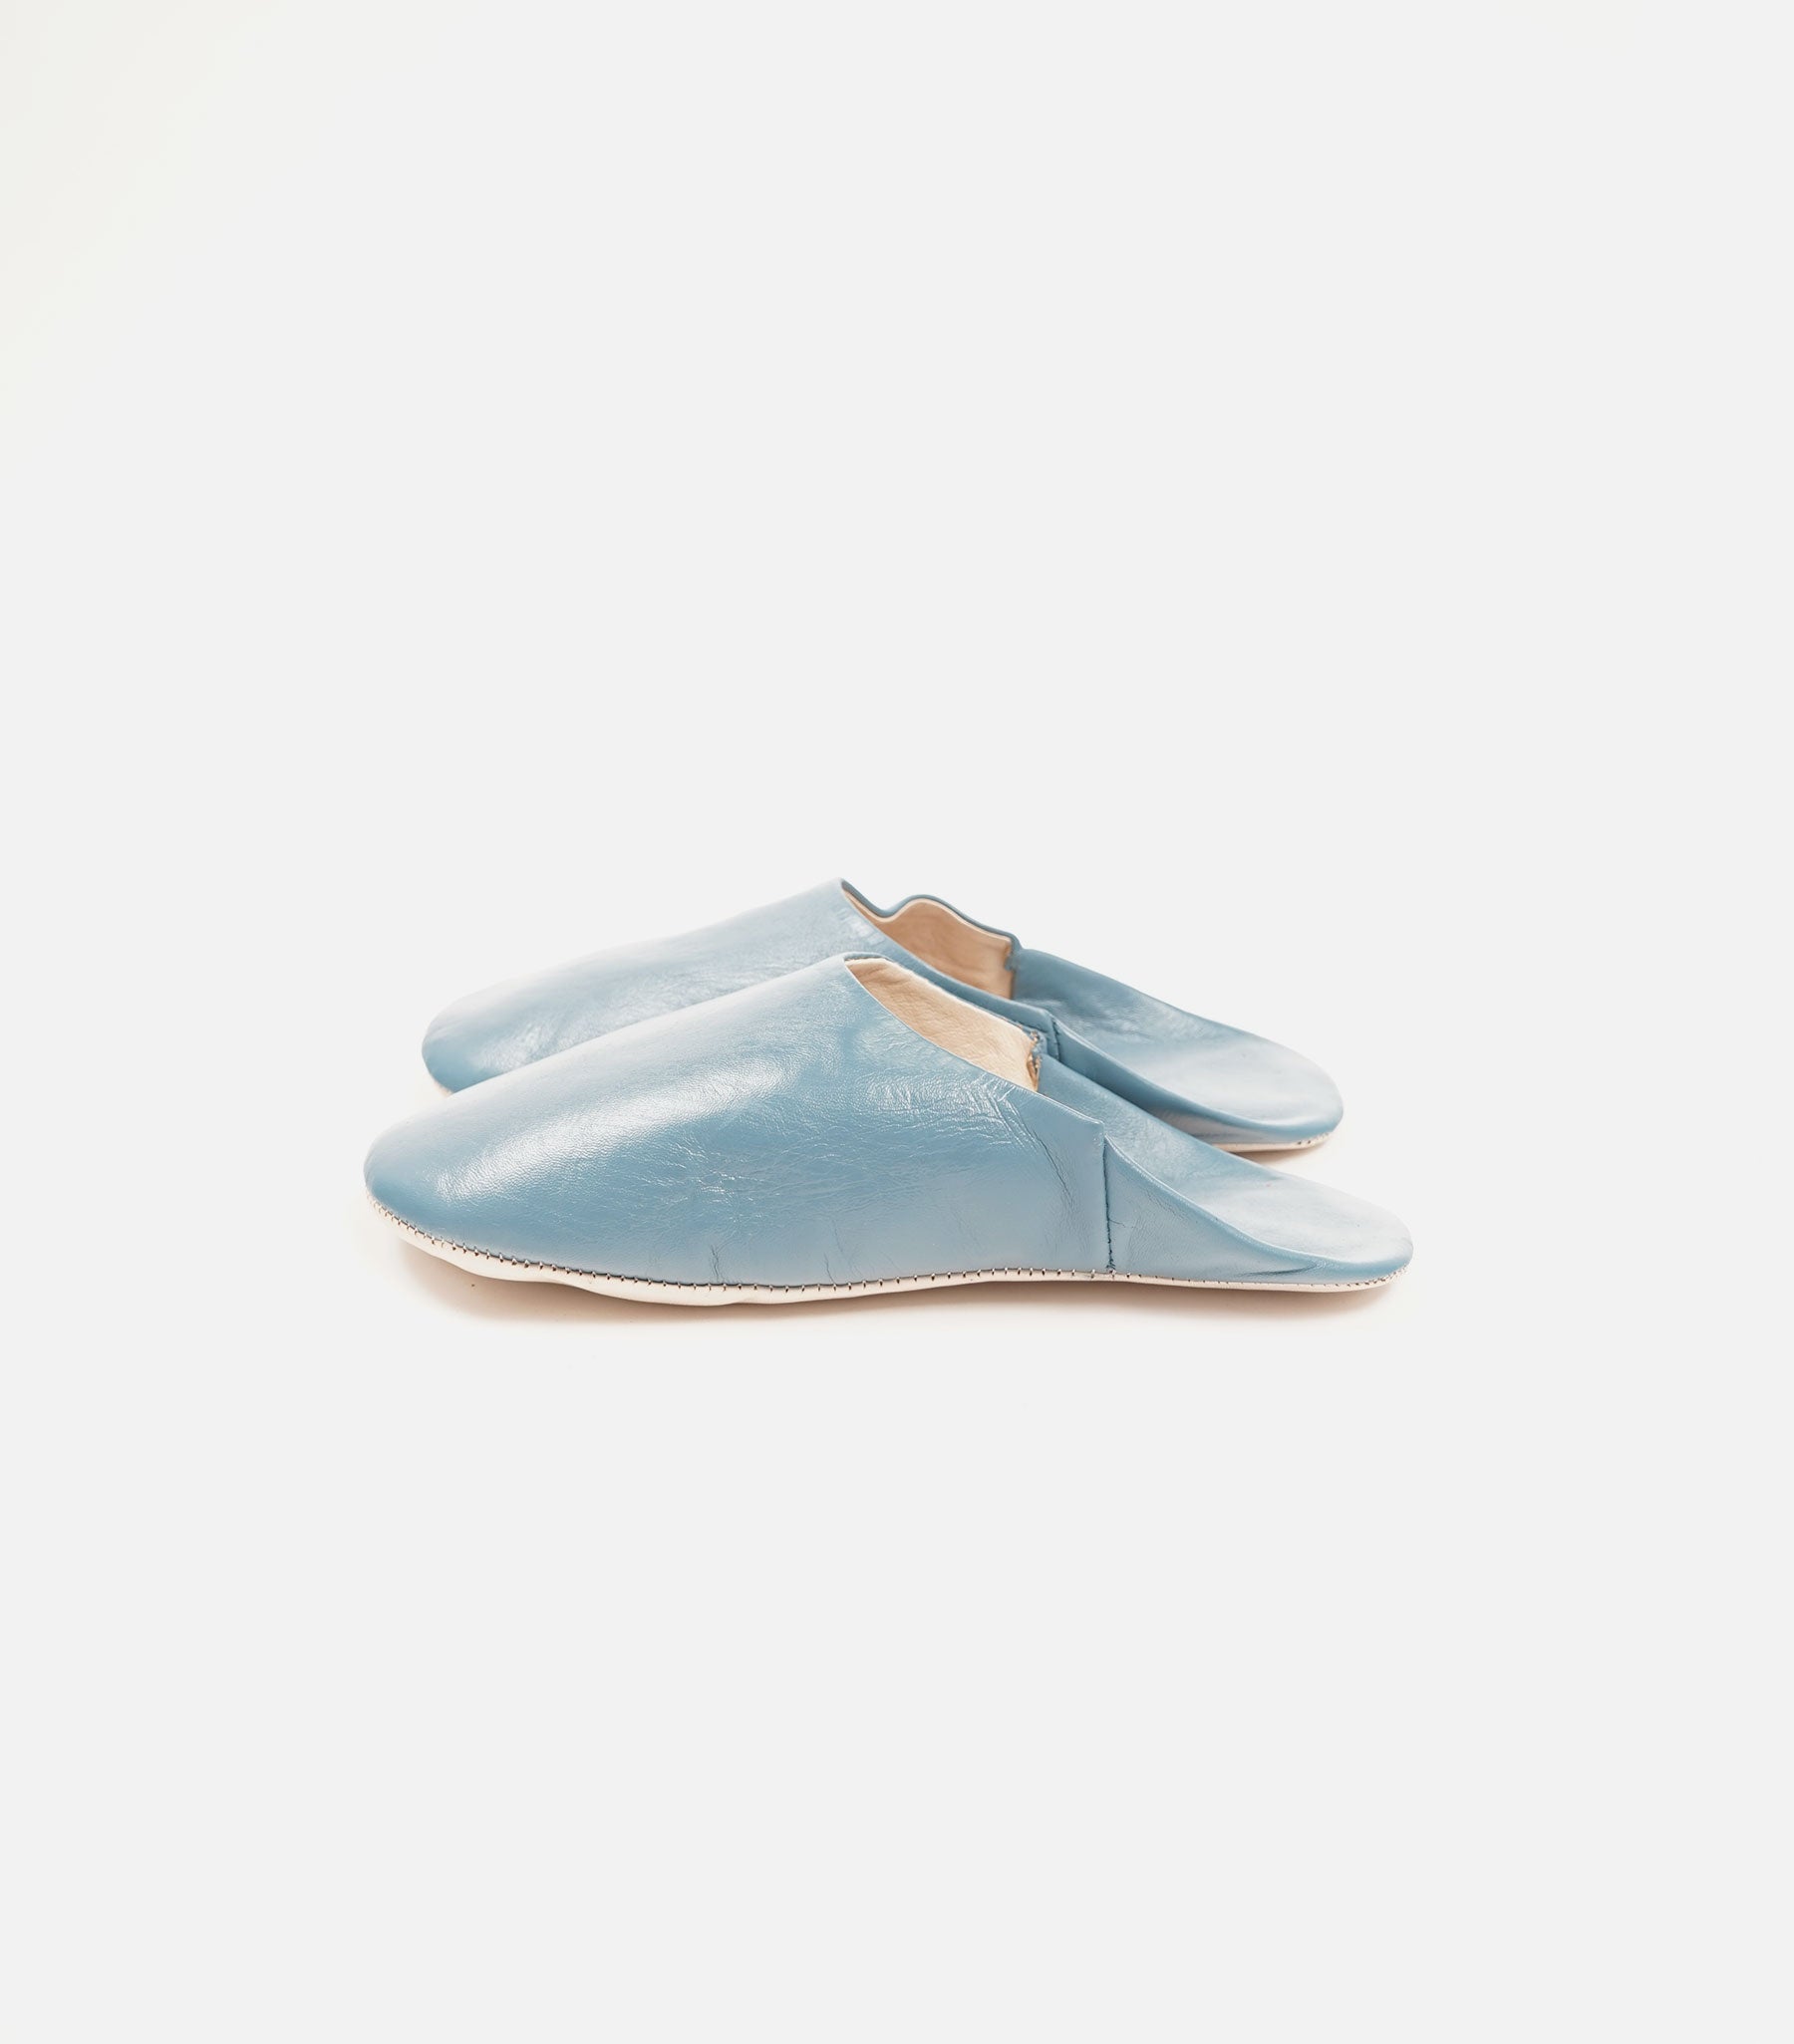 Moroccan Babouche Basic Slippers, Blue Gray